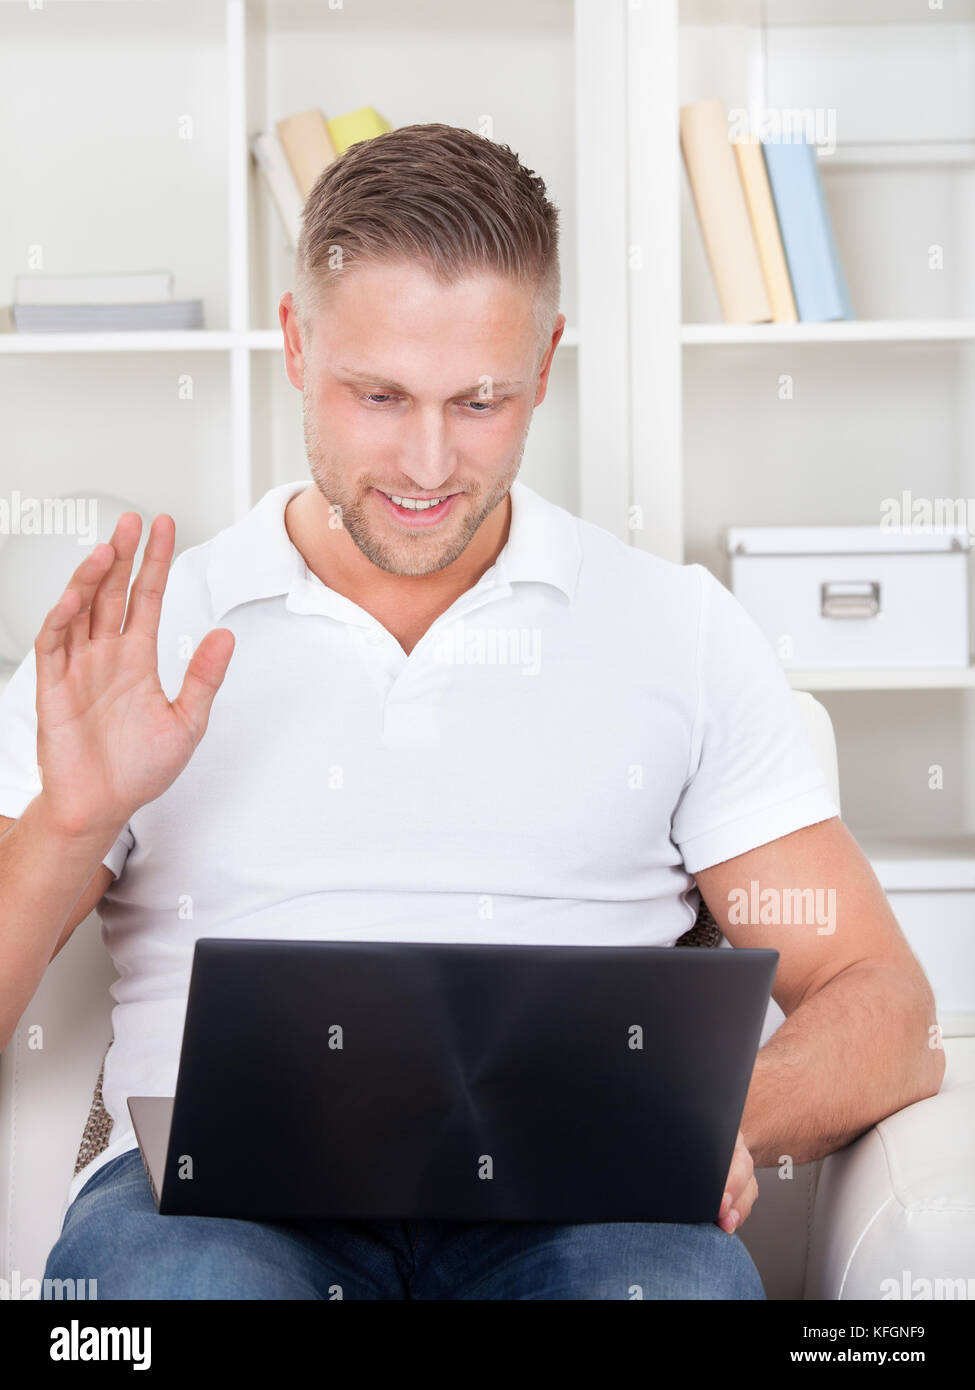 Businessman waving in pleasure to his laptop as he sits on a chair reading information on the screen Stock Photo